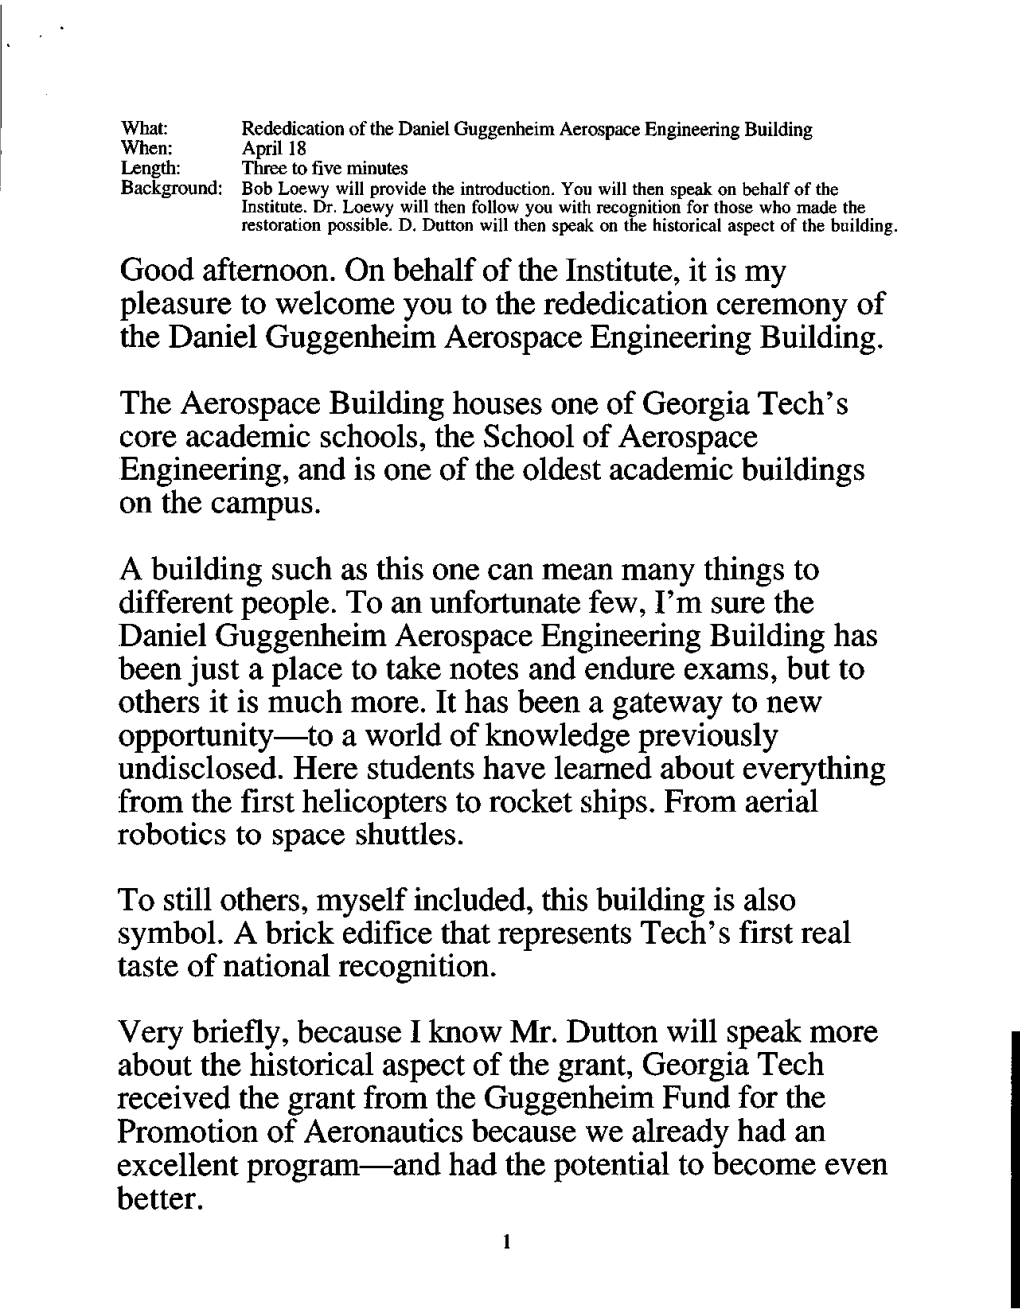 Good Afternoon. on Behalf of the Institute, It Is My Pleasure to Welcome You to the Rededication Ceremony of the Daniel Guggenheim Aerospace Engineering Building